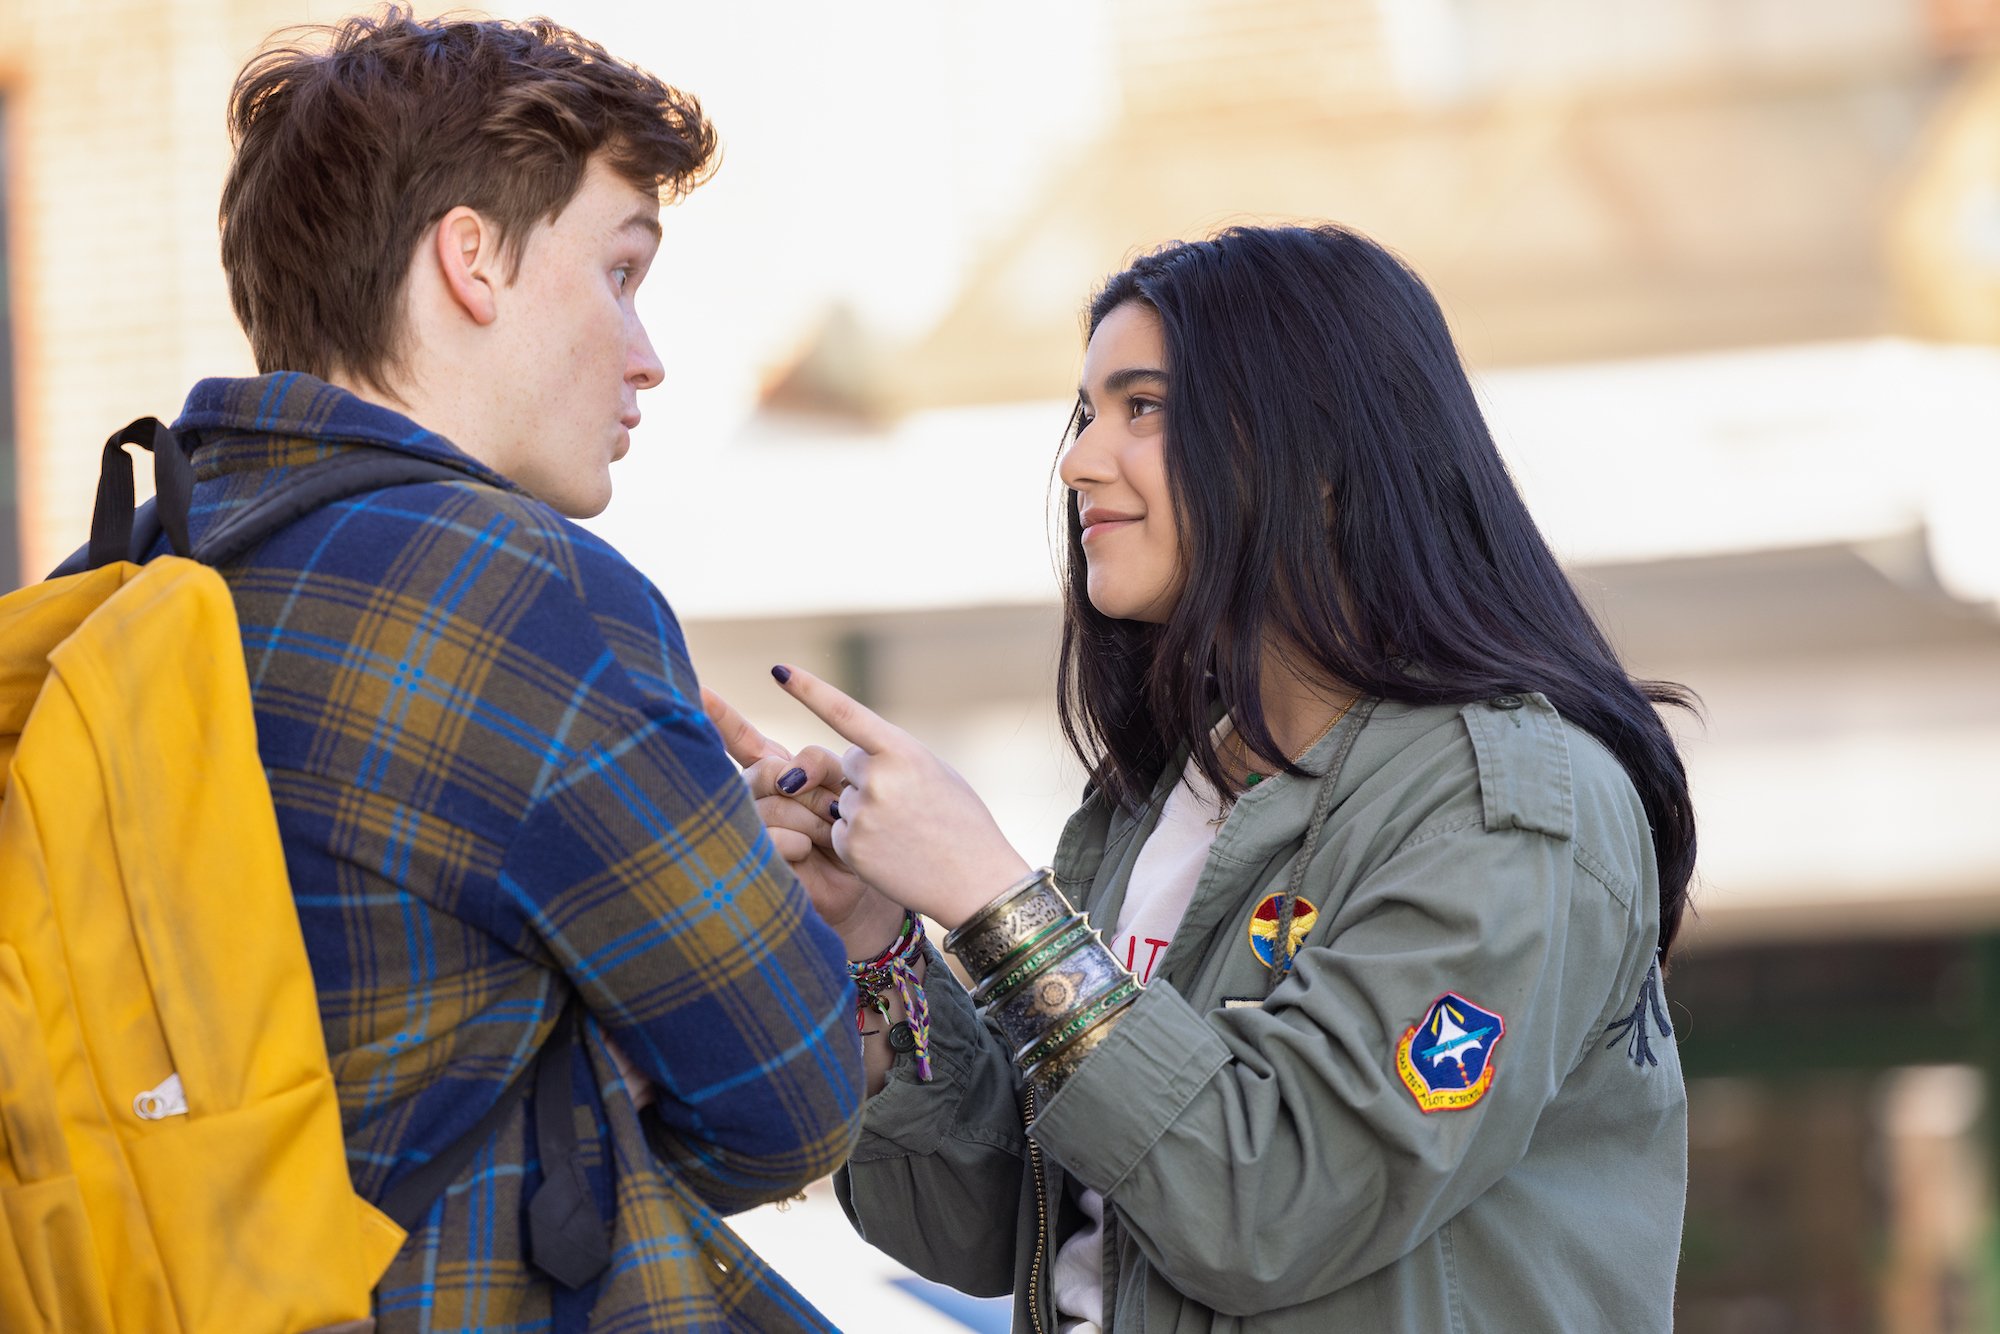 Matthew Lintz and Iman Vellani, in character as Bruno and Kamala, share a scene in 'Ms. Marvel' Episode 2. Bruno wears a blue and yellow plaid shirt and yellow backpack. Kamala wears an army green jacket over a white shirt.